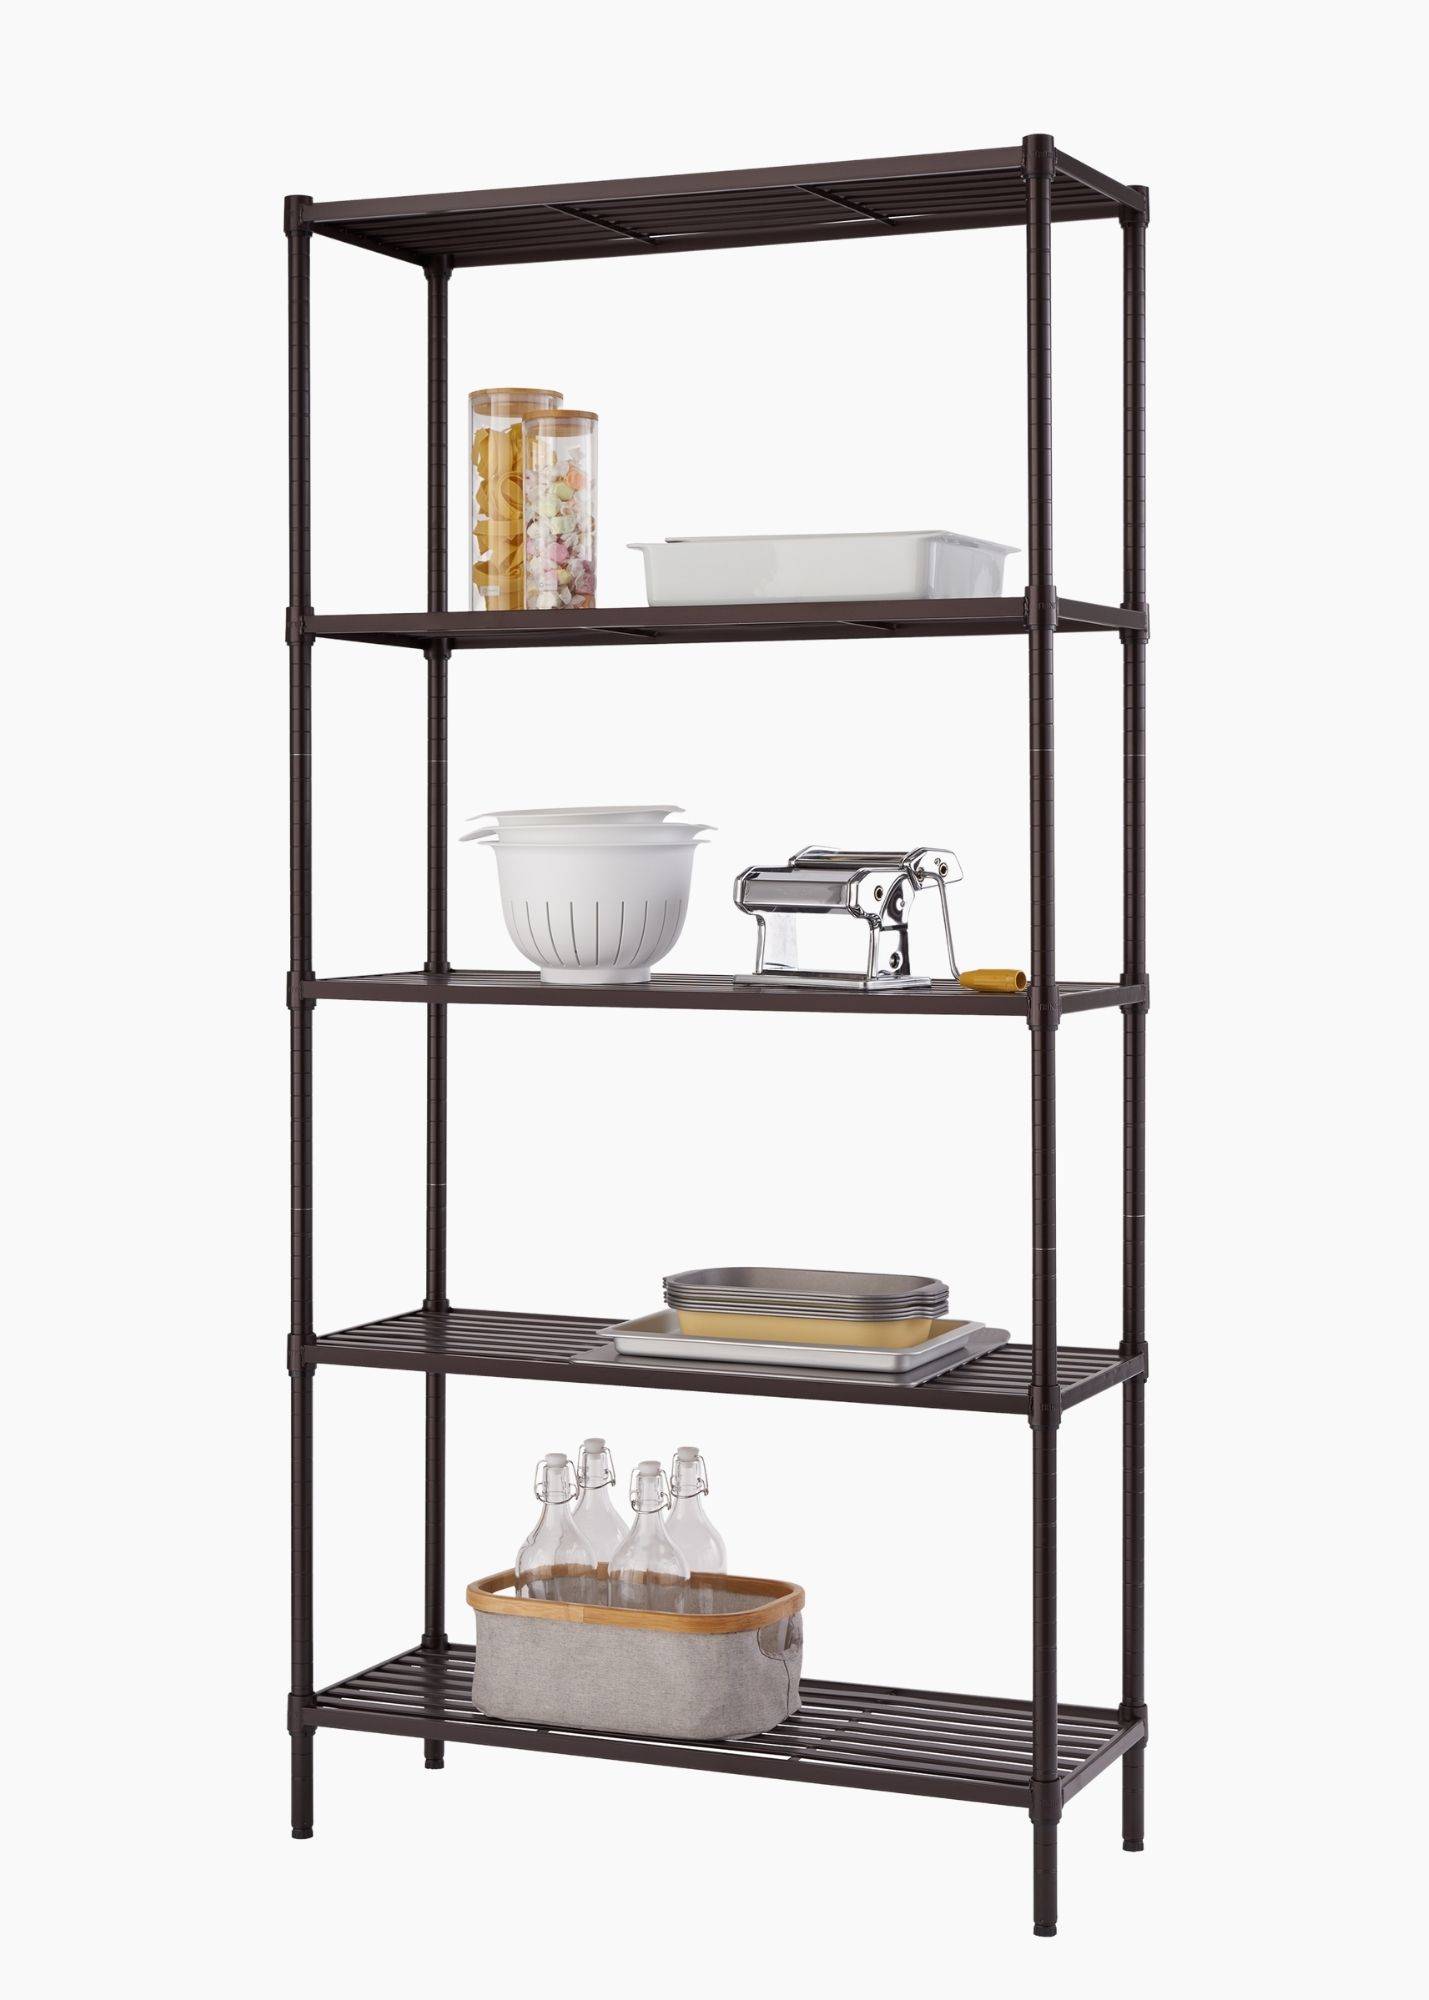 shelving rack with 5 shelves filled with kitchen tools